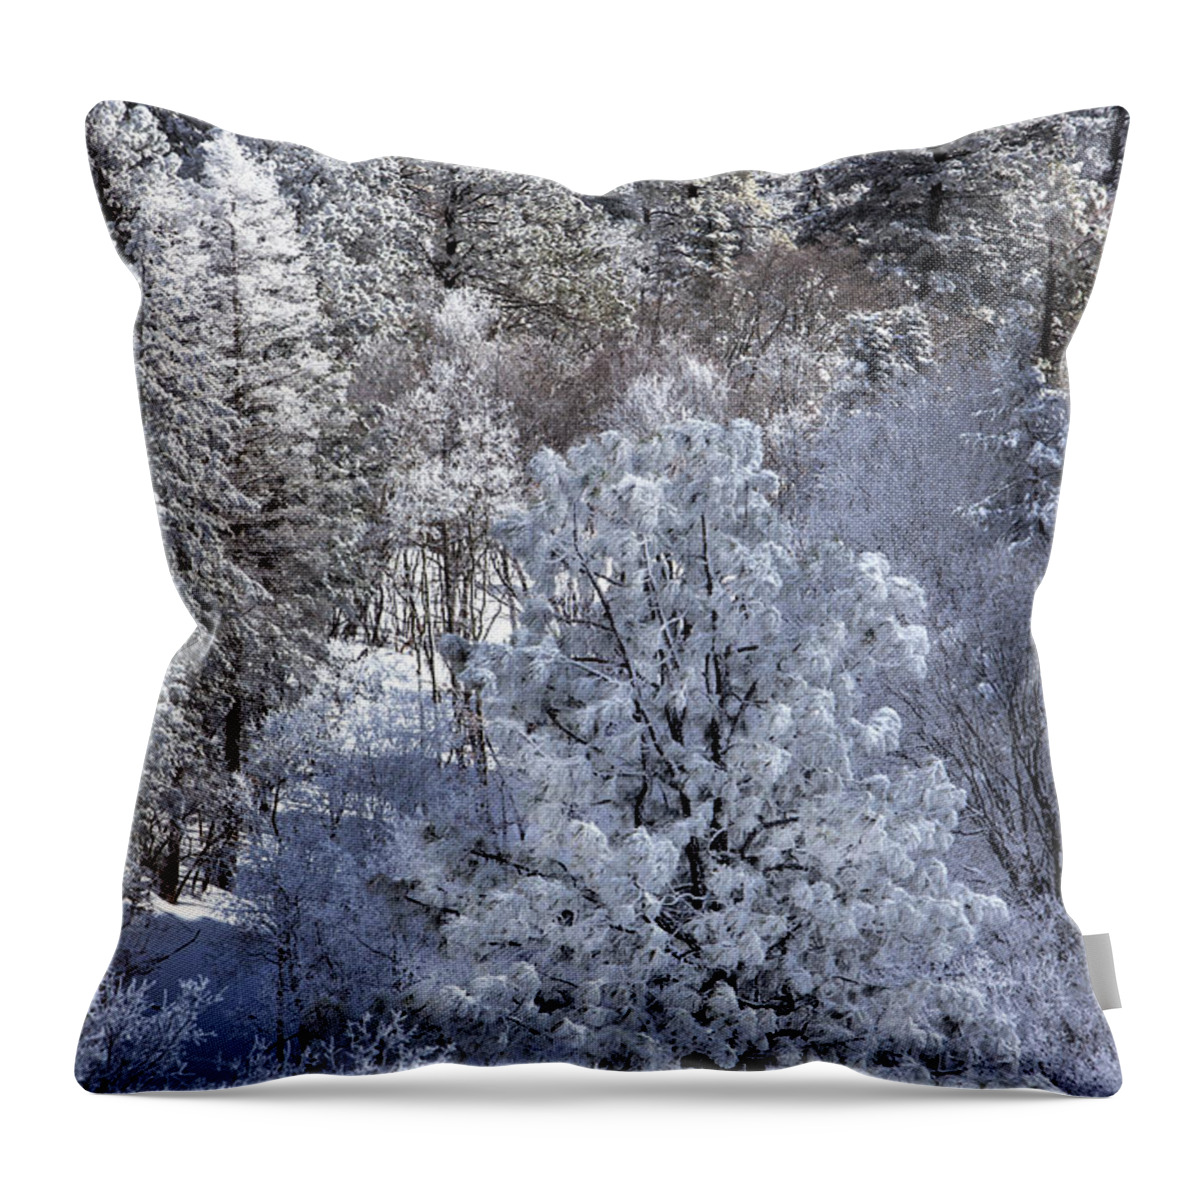 Snow Throw Pillow featuring the photograph Frosty Tree Study II by Diana Powell